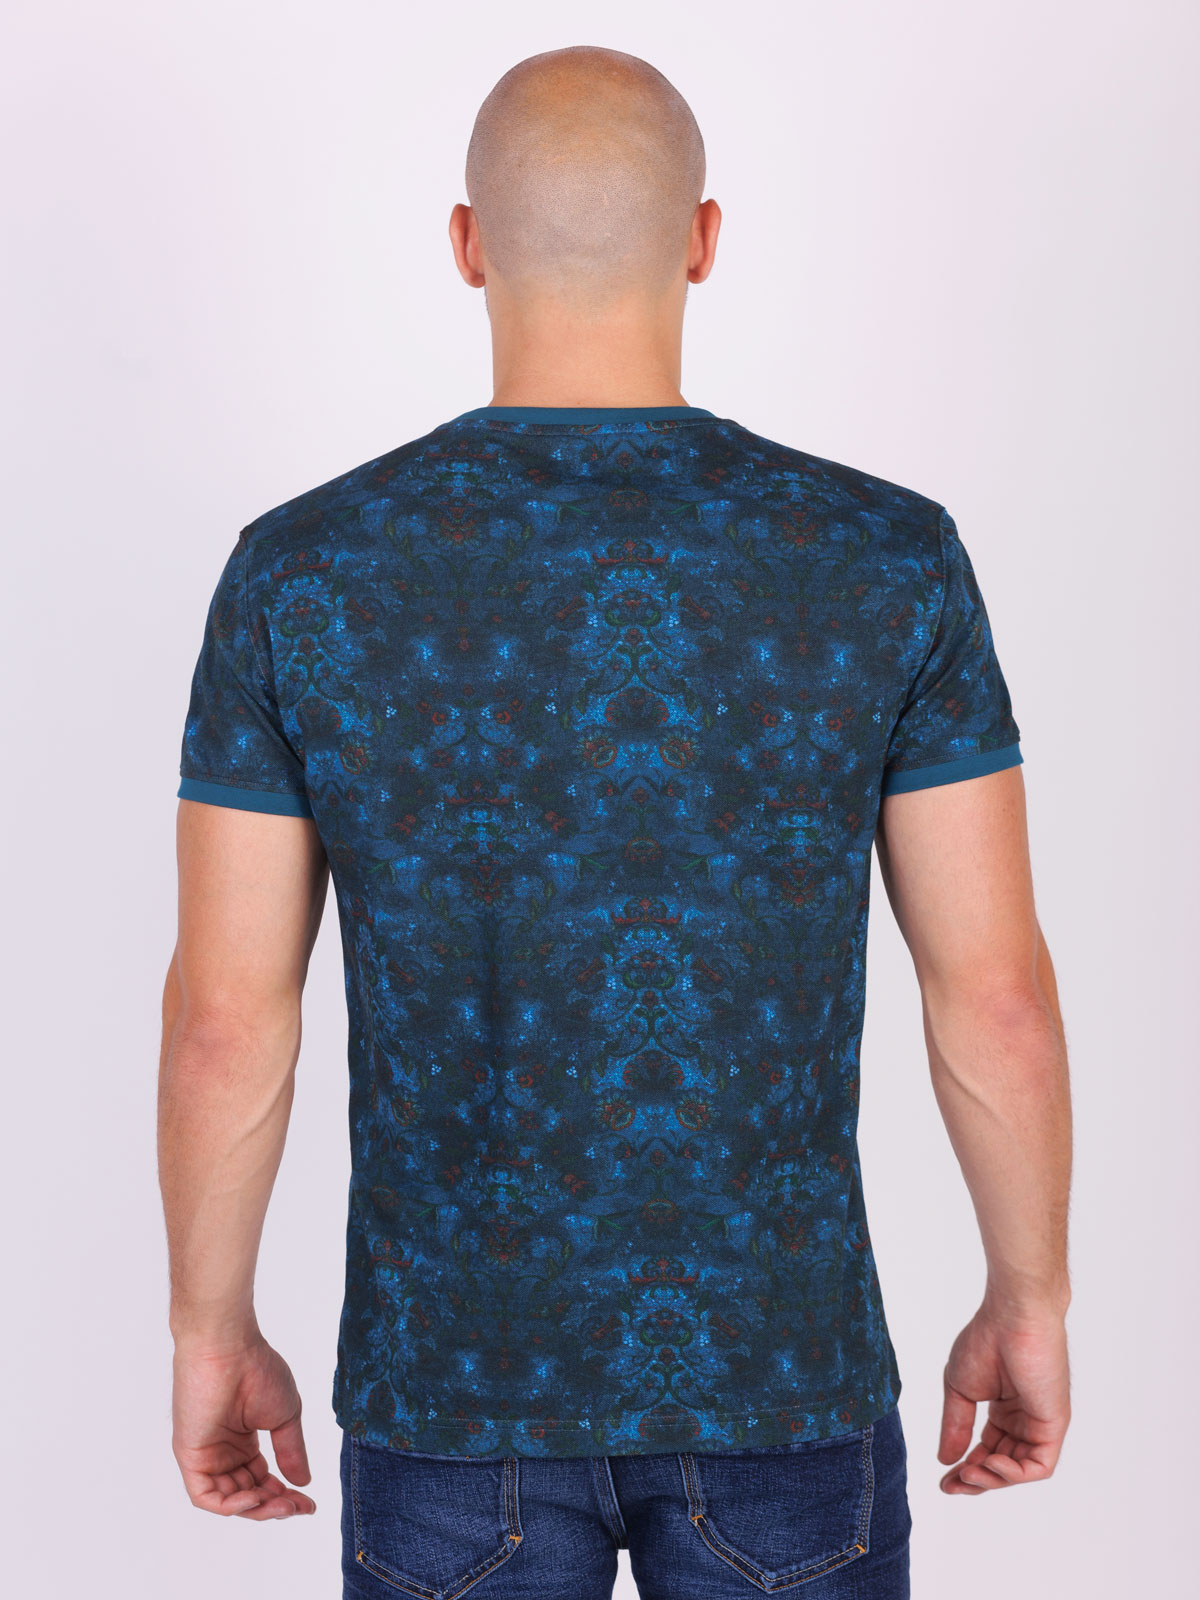 Tshirt turquoise with flowers - 95369 € 32.62 img2